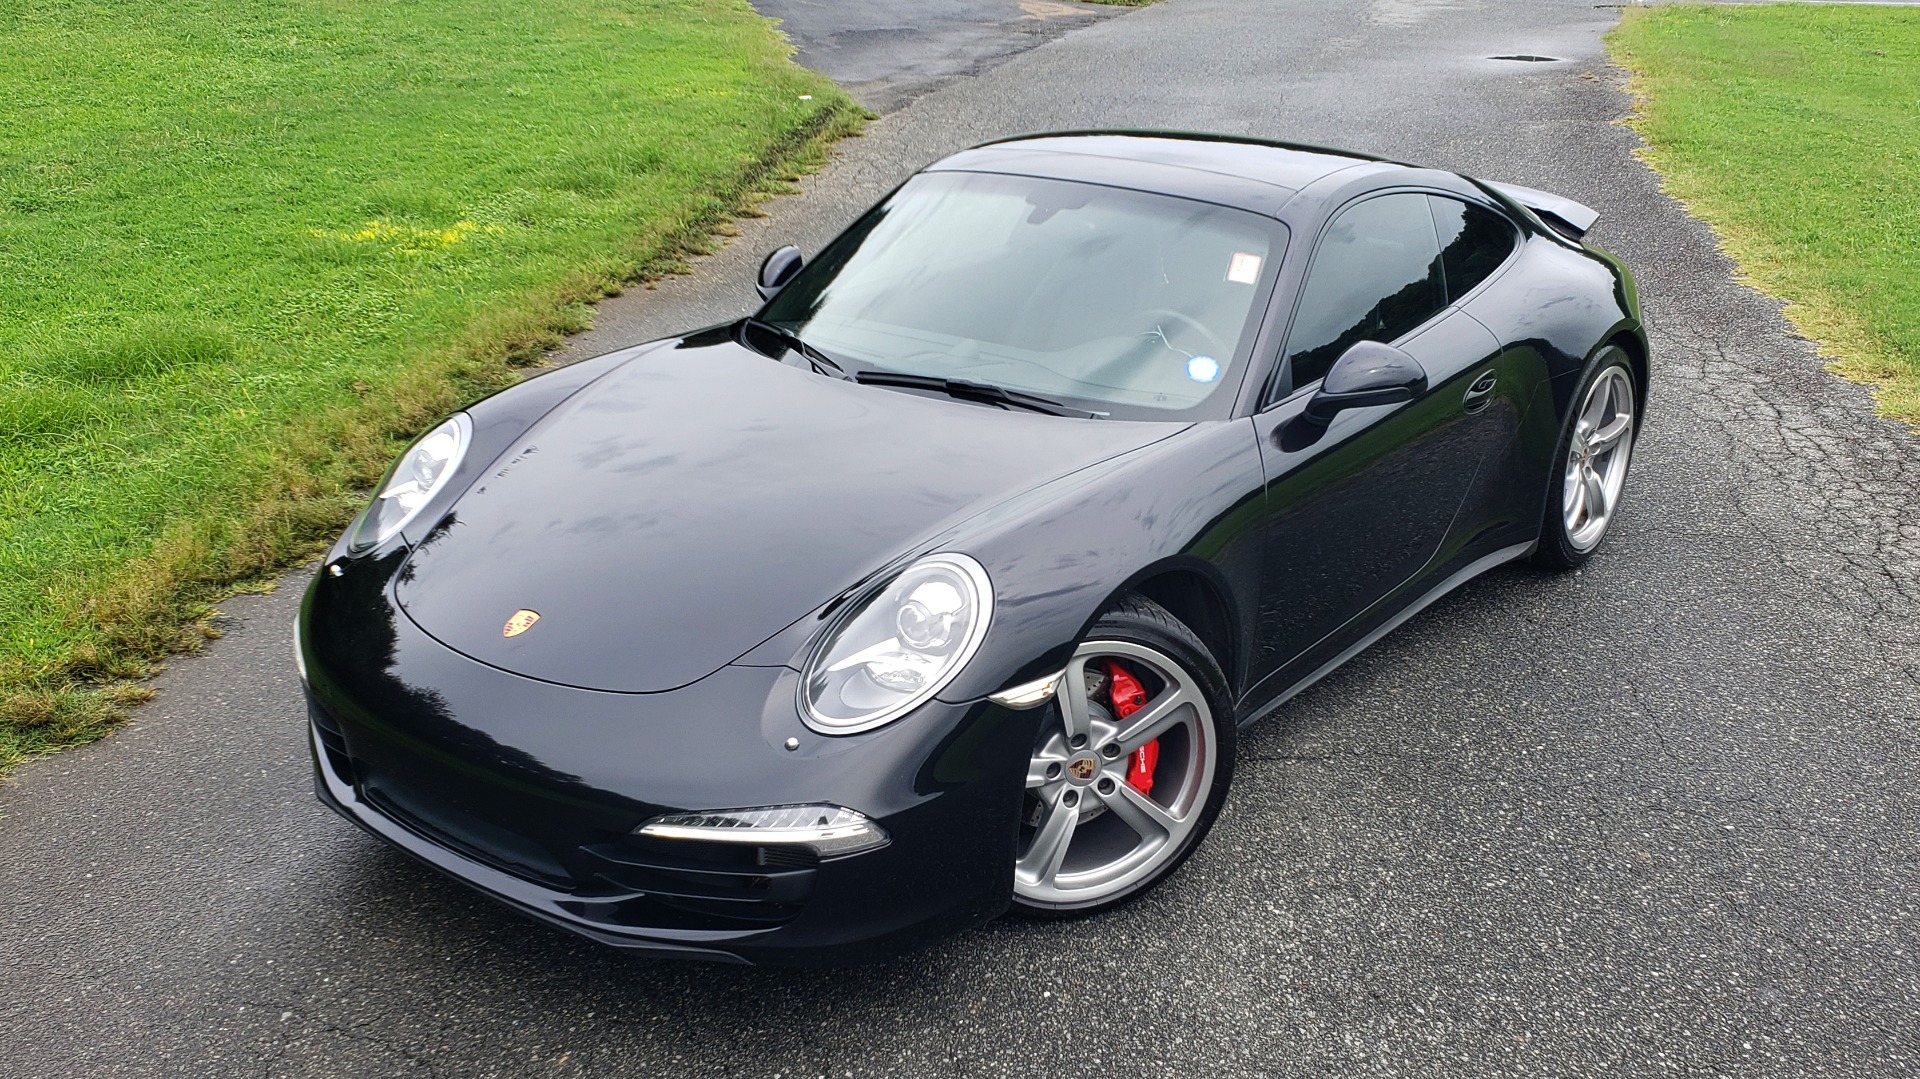 Used 2014 Porsche 911 CARRERA 4S / AWD / 3.8L / PDK / CHRONO / NAV / BOSE / SUNROOF for sale Sold at Formula Imports in Charlotte NC 28227 3